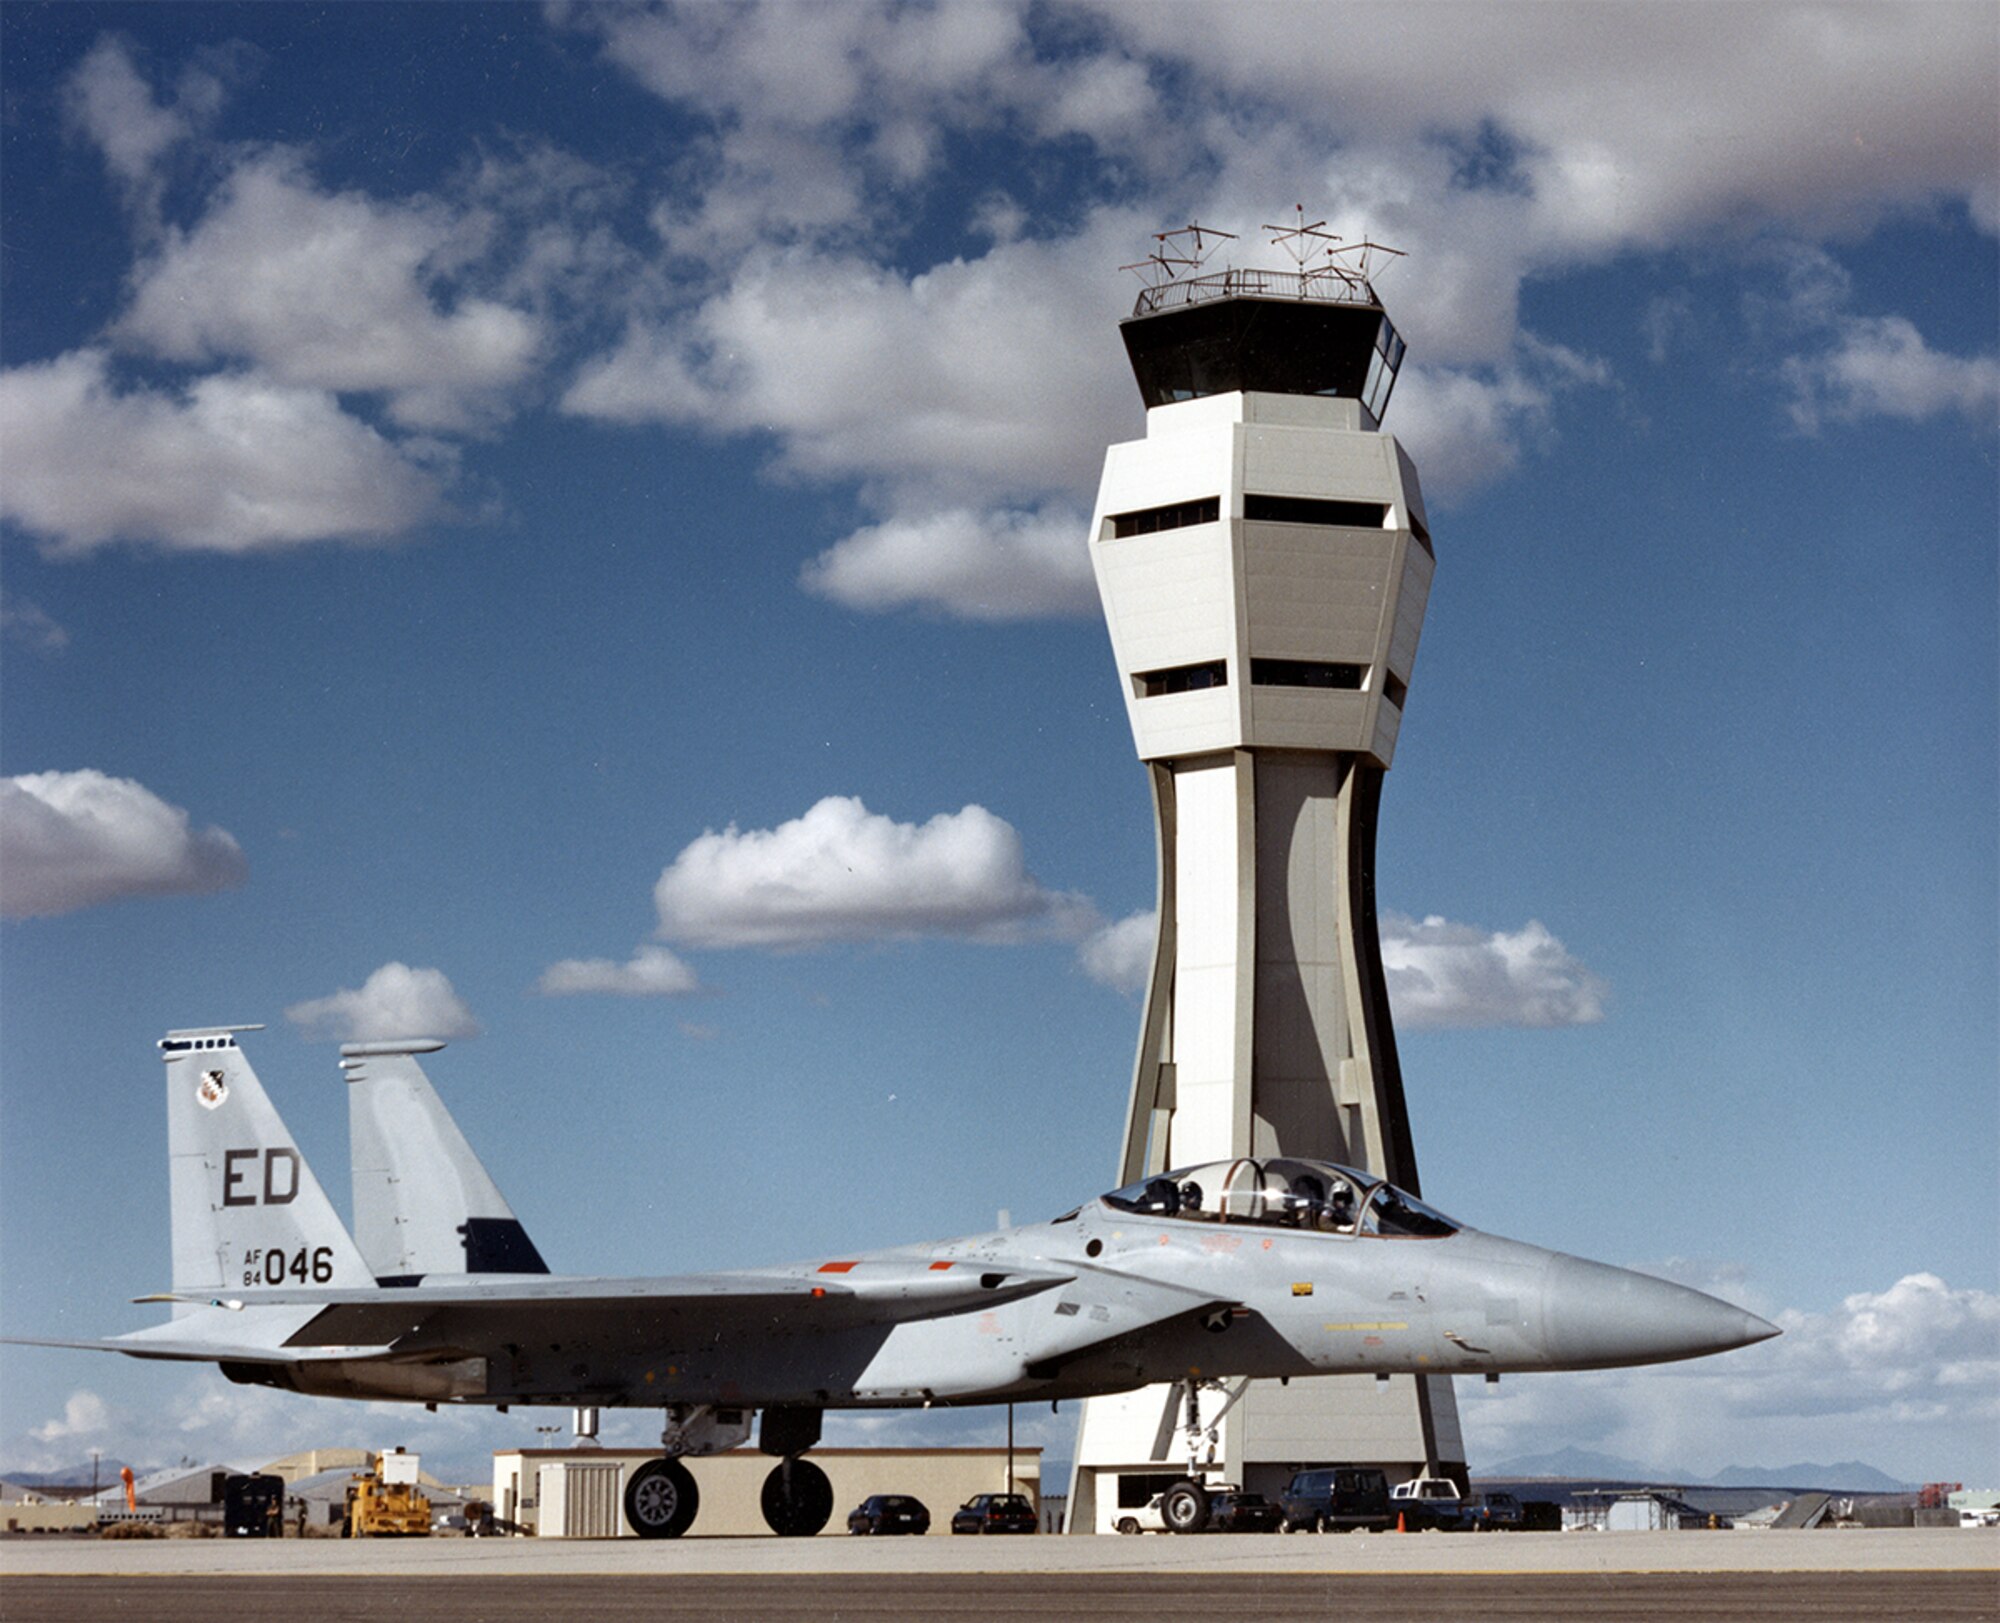 #OTD 20 Apr 1987 at Edwards - The new control tower was officially opened with the takeoff in an F-15.  The new facility, stressed to withstand an 8.0 earthquake as well as 120+ mph winds, replaced the ten-story red and white structure that had been a landmark since 1956.  Today, the cab of the old tower is at the Century Circle exhibit outside the West Gate entry point.